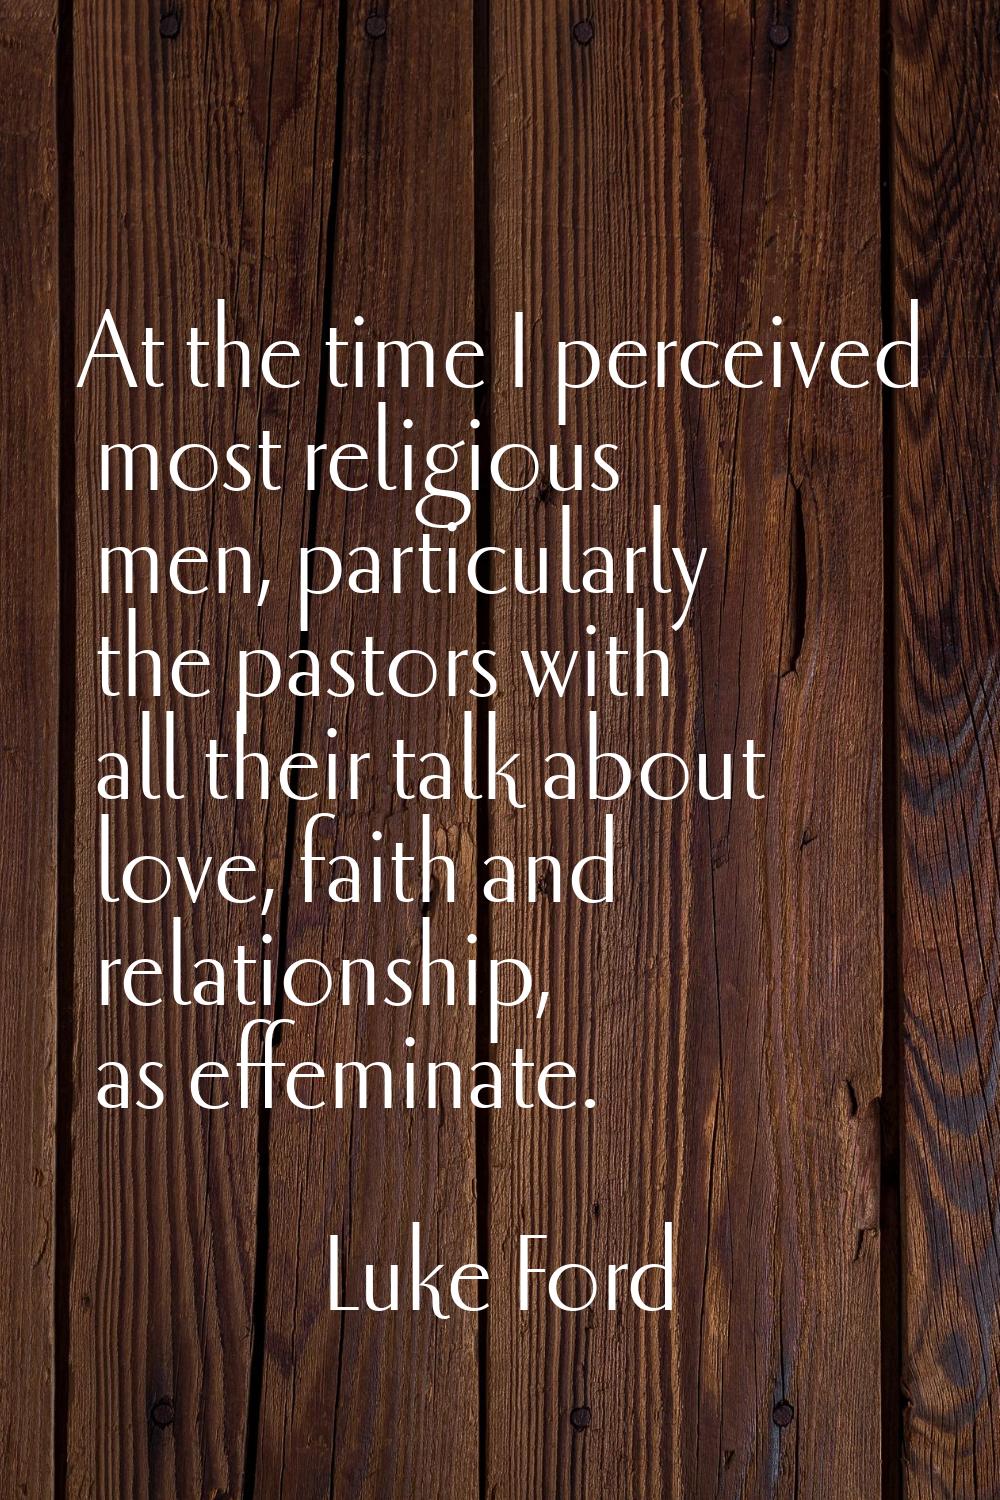 At the time I perceived most religious men, particularly the pastors with all their talk about love